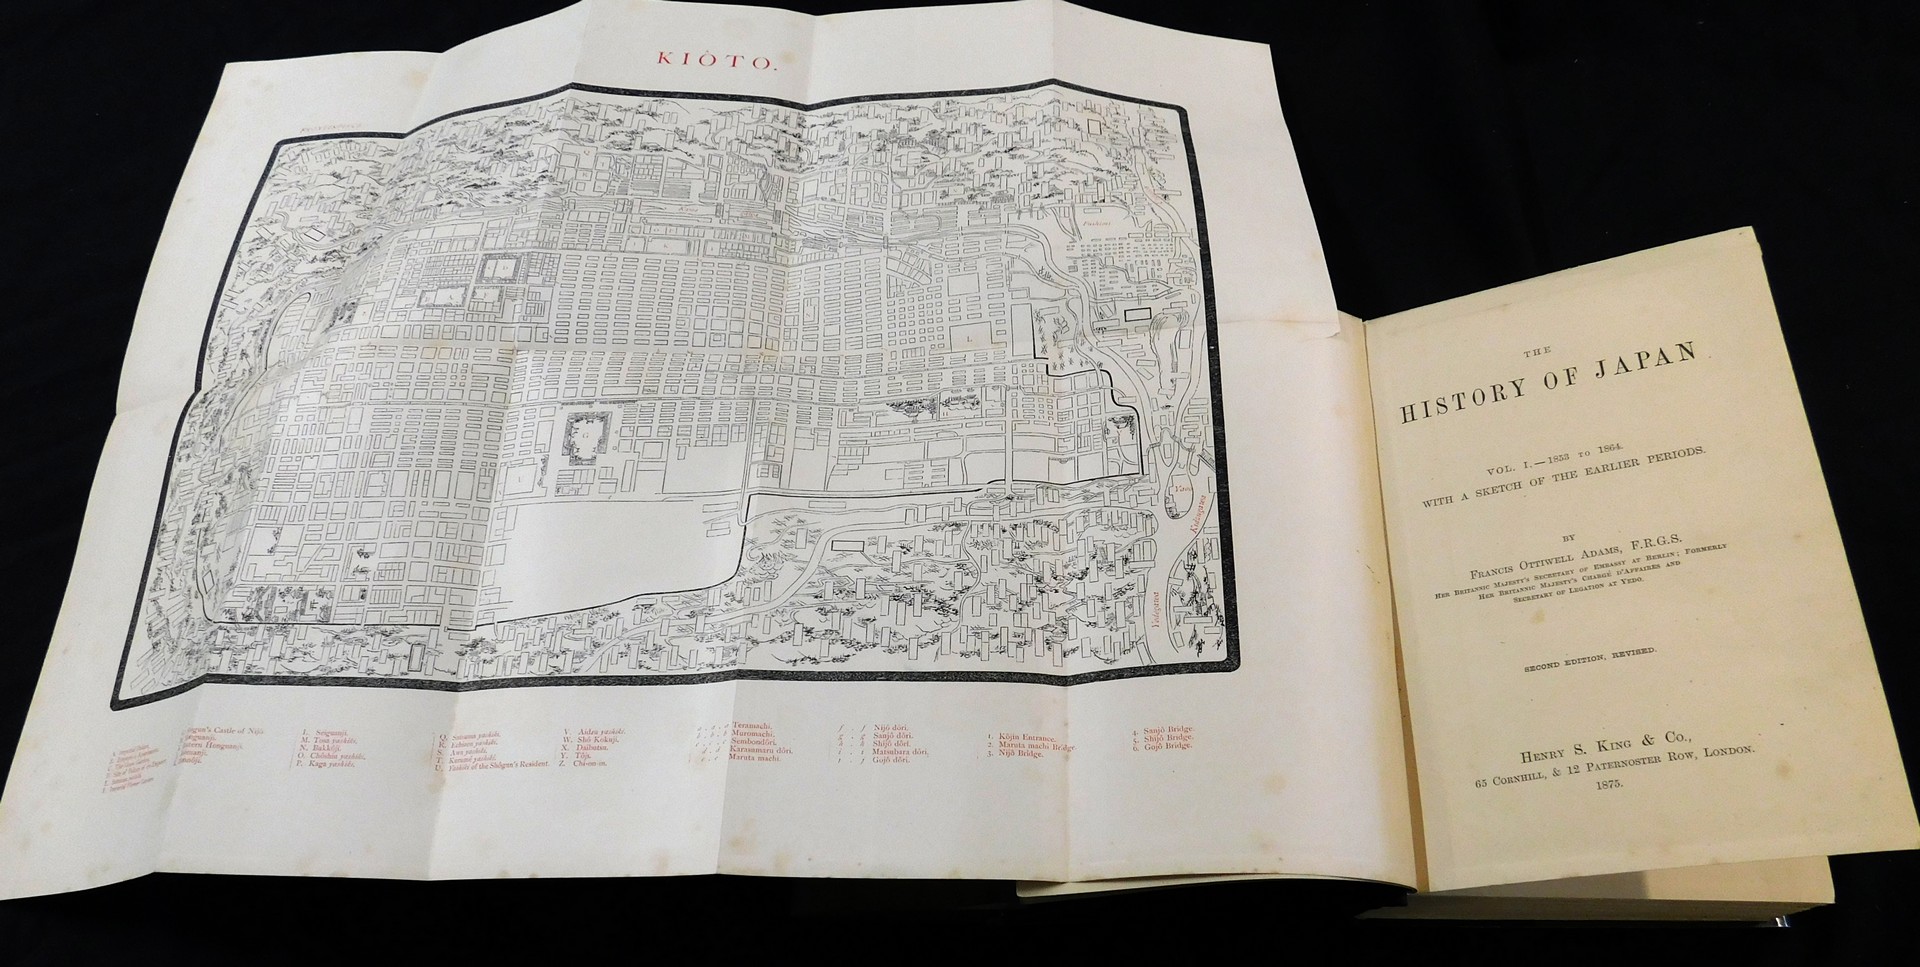 FRANCIS OTTIWELL ADAMS: THE HISTORY OF JAPAN, London, Henry S King & Co, 1875, 2nd edition, revised, - Image 2 of 2